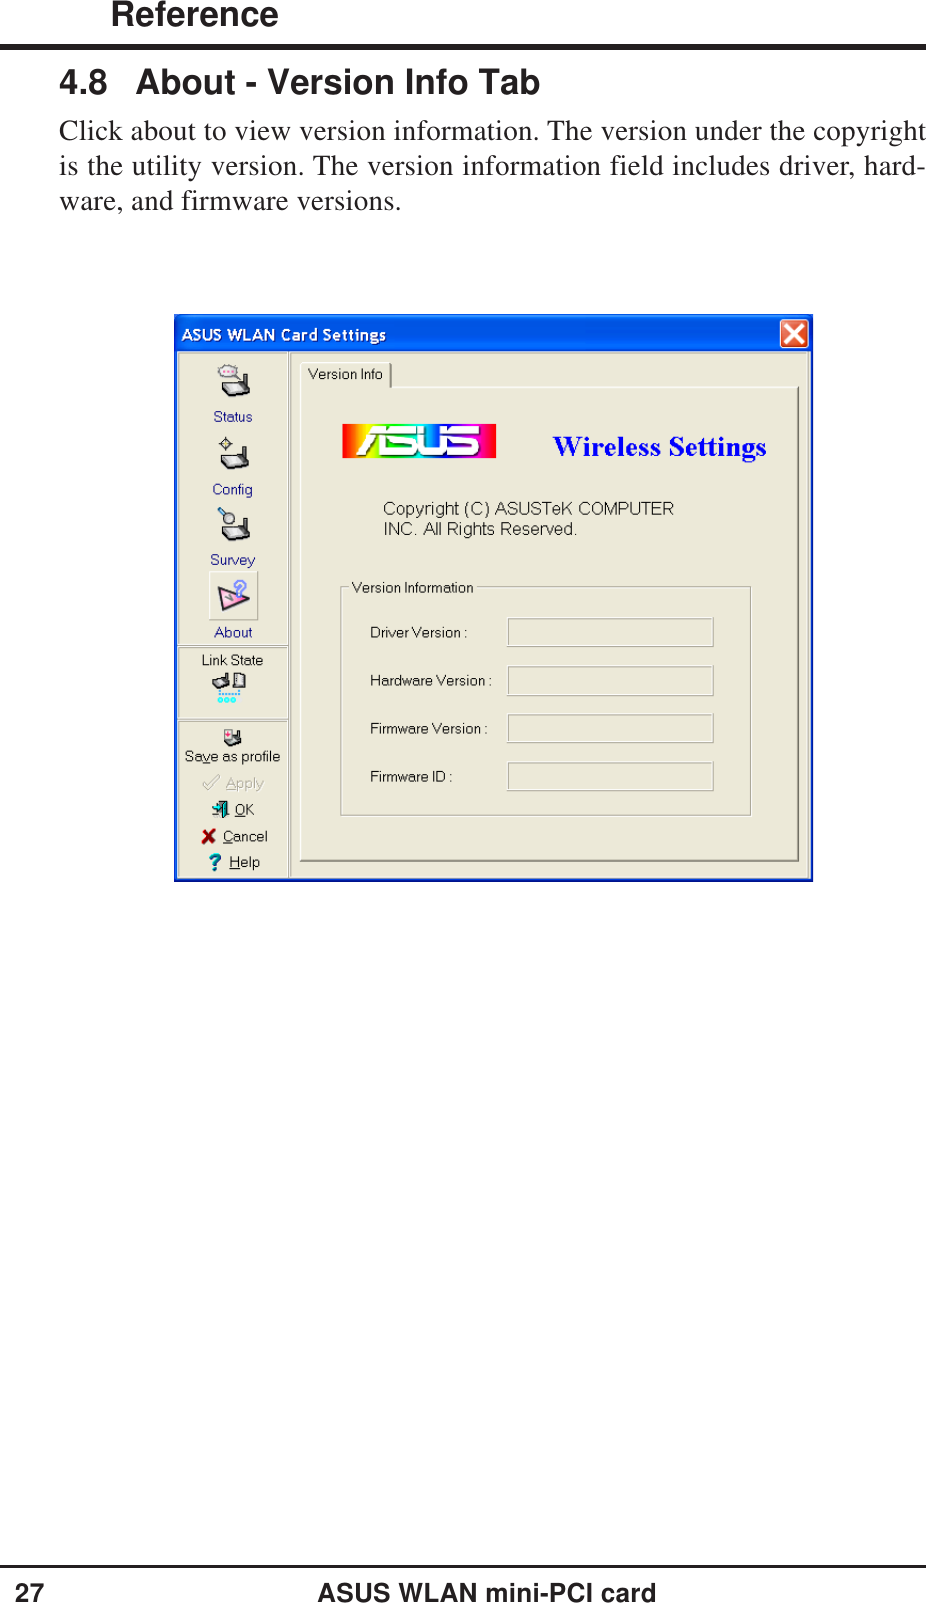 27ASUS WLAN mini-PCI card ReferenceChapter 34.8 About - Version Info TabClick about to view version information. The version under the copyrightis the utility version. The version information field includes driver, hard-ware, and firmware versions.